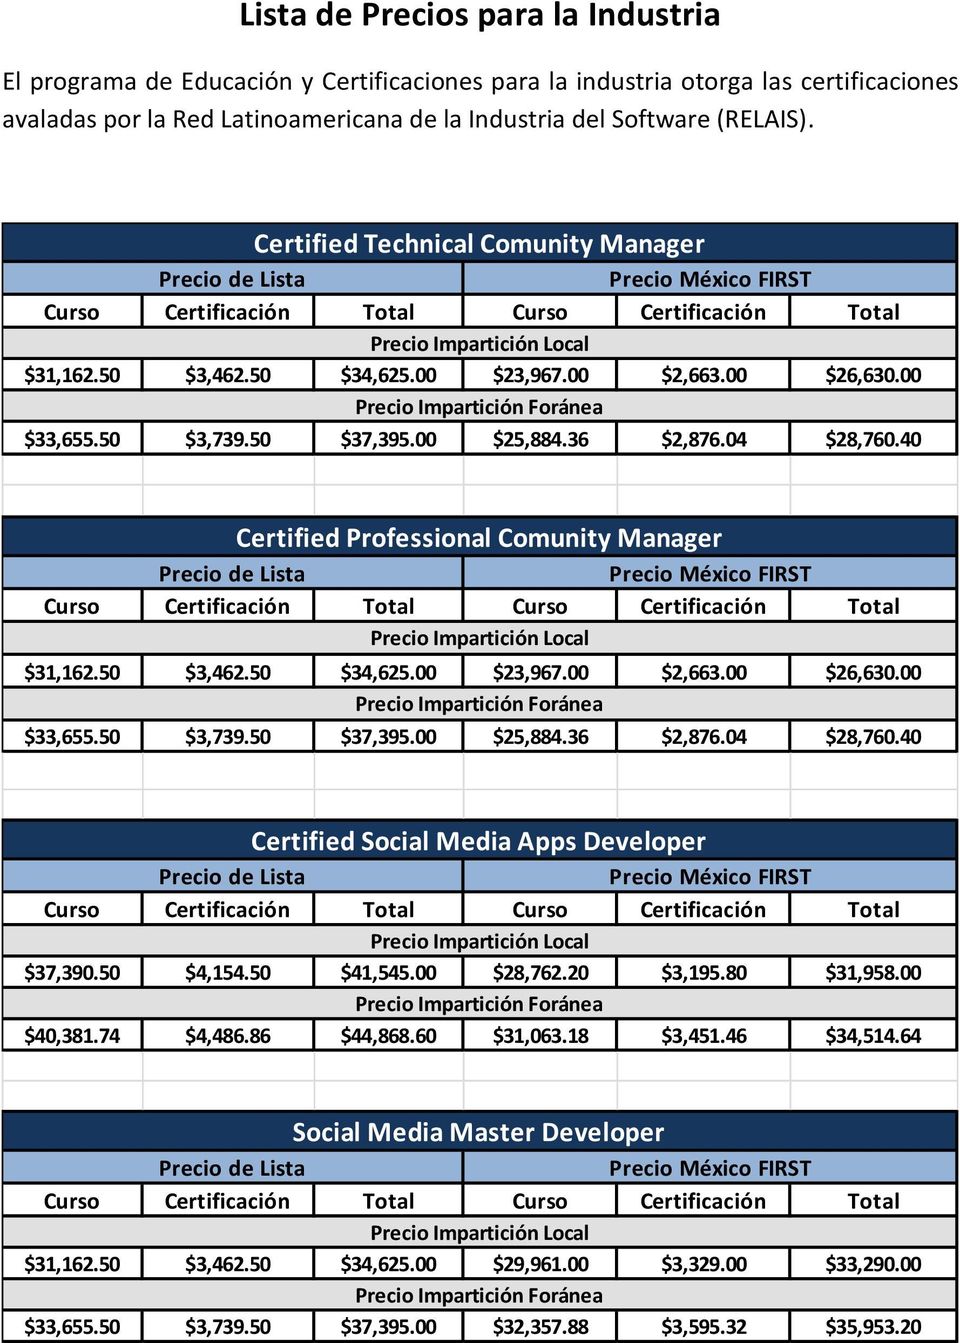 40 Certified Professional Comunity Manager $31,162.50 $3,462.50 $34,625.00 $23,967.00 $2,663.00 $26,630.00 $33,655.50 $3,739.50 $37,395.00 $25,884.36 $2,876.04 $28,760.